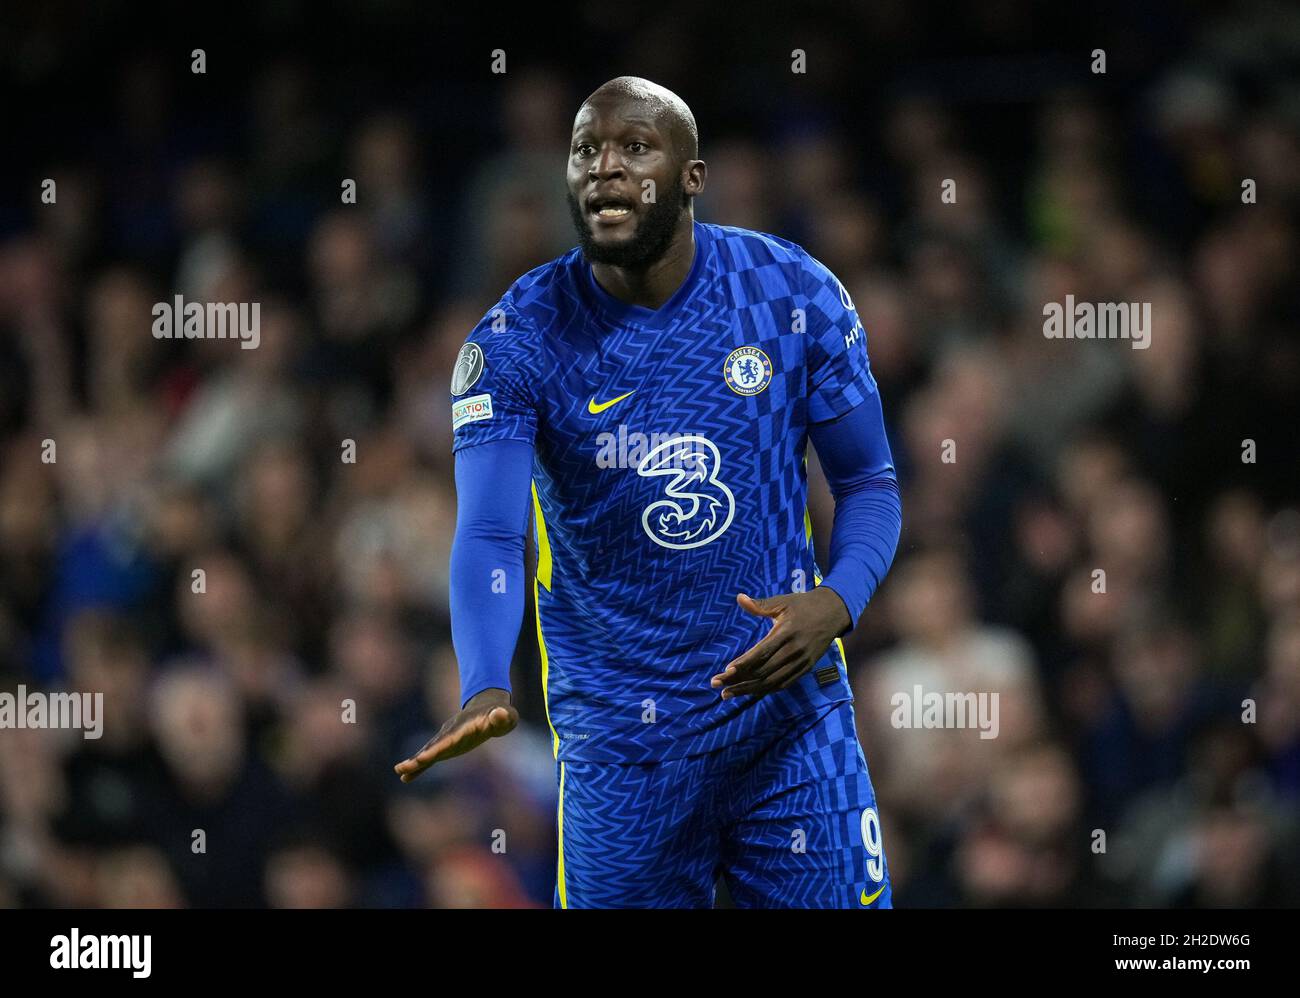 London, UK. 20th Oct, 2021. Romelu Lukaku of Chelsea during the UEFA Champions League match between Chelsea and Malmo at Stamford Bridge, London, England on 20 October 2021. Photo by Andy Rowland. Credit: PRiME Media Images/Alamy Live News Stock Photo